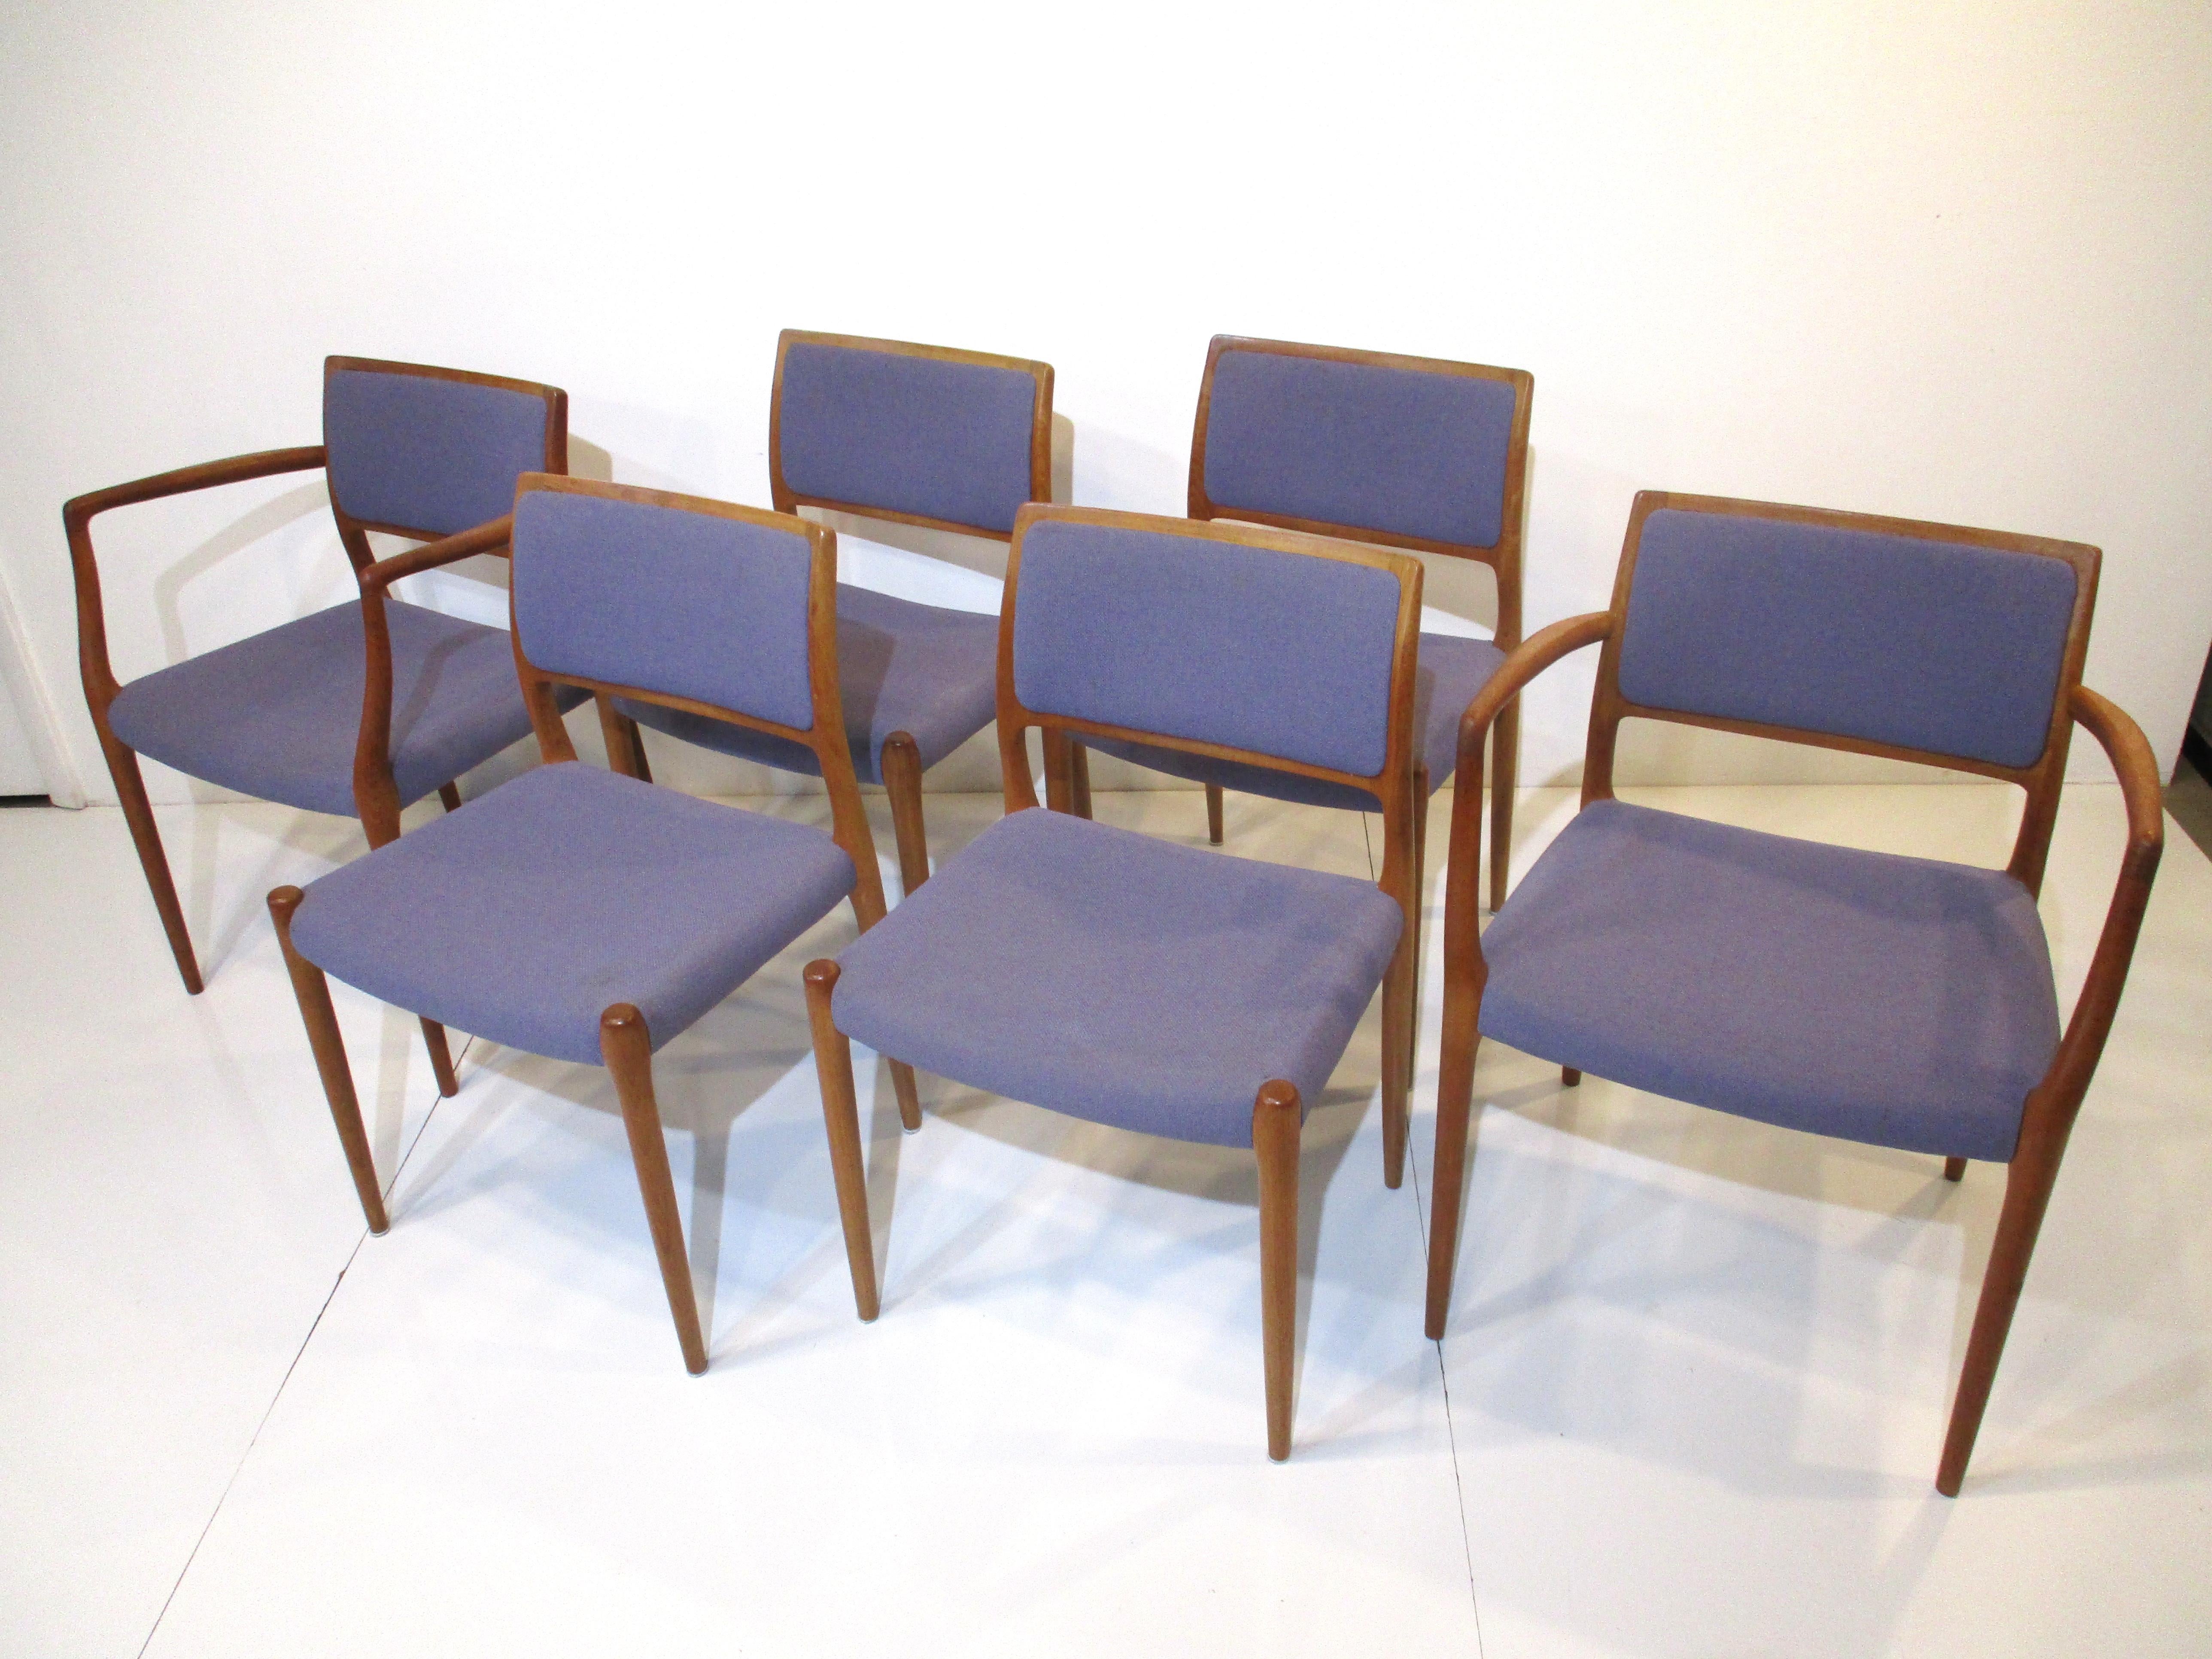 Teak Upholstered Dining Chairs by Niels Moller Denmark 1